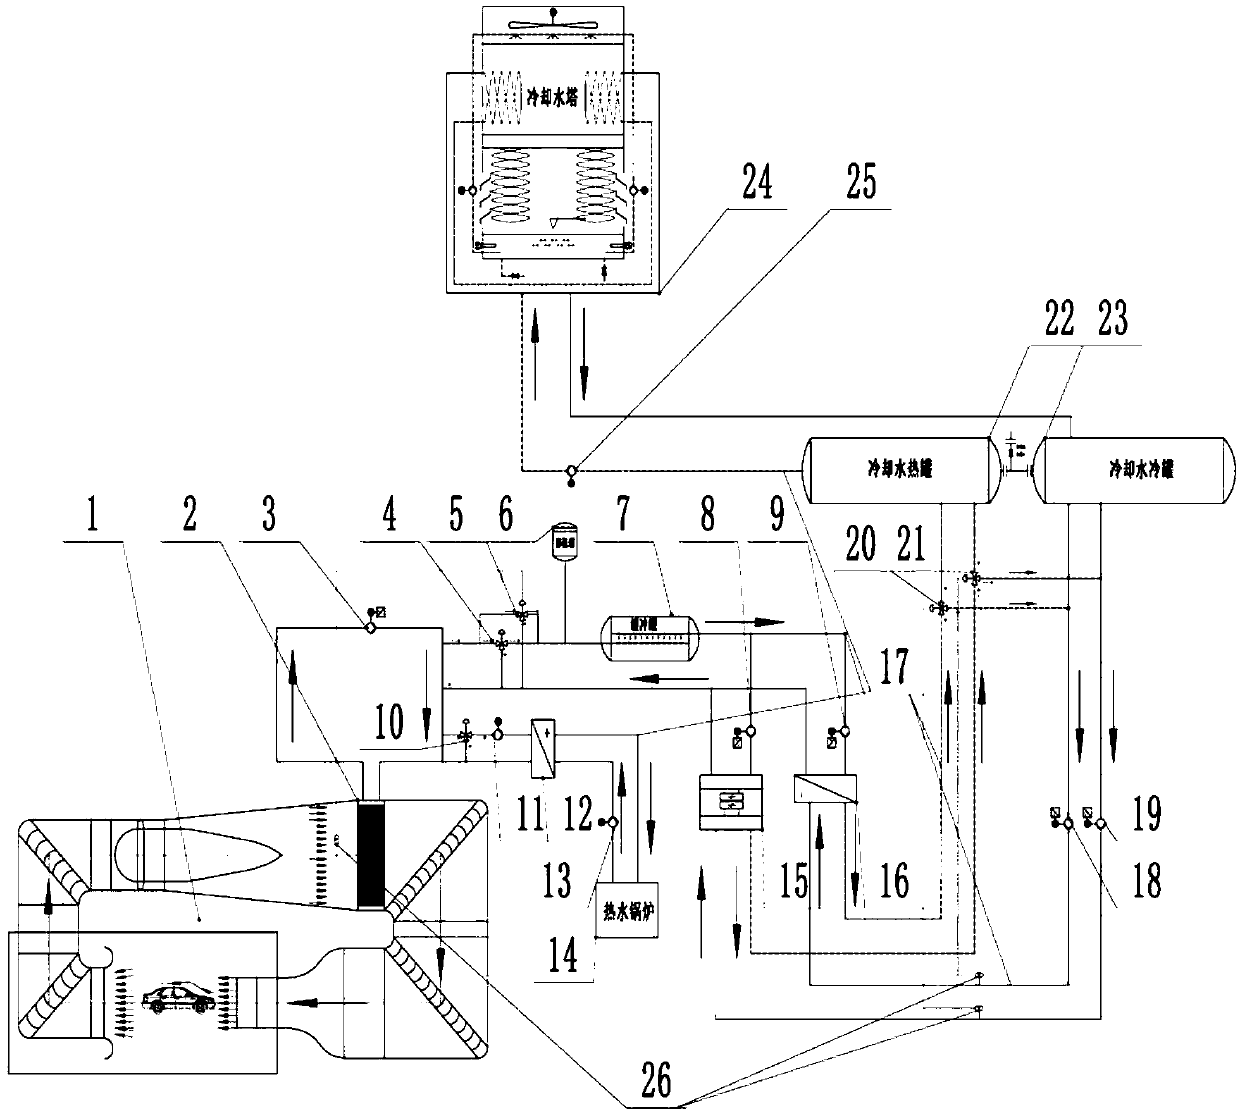 Temperature control system of environmental wind tunnel